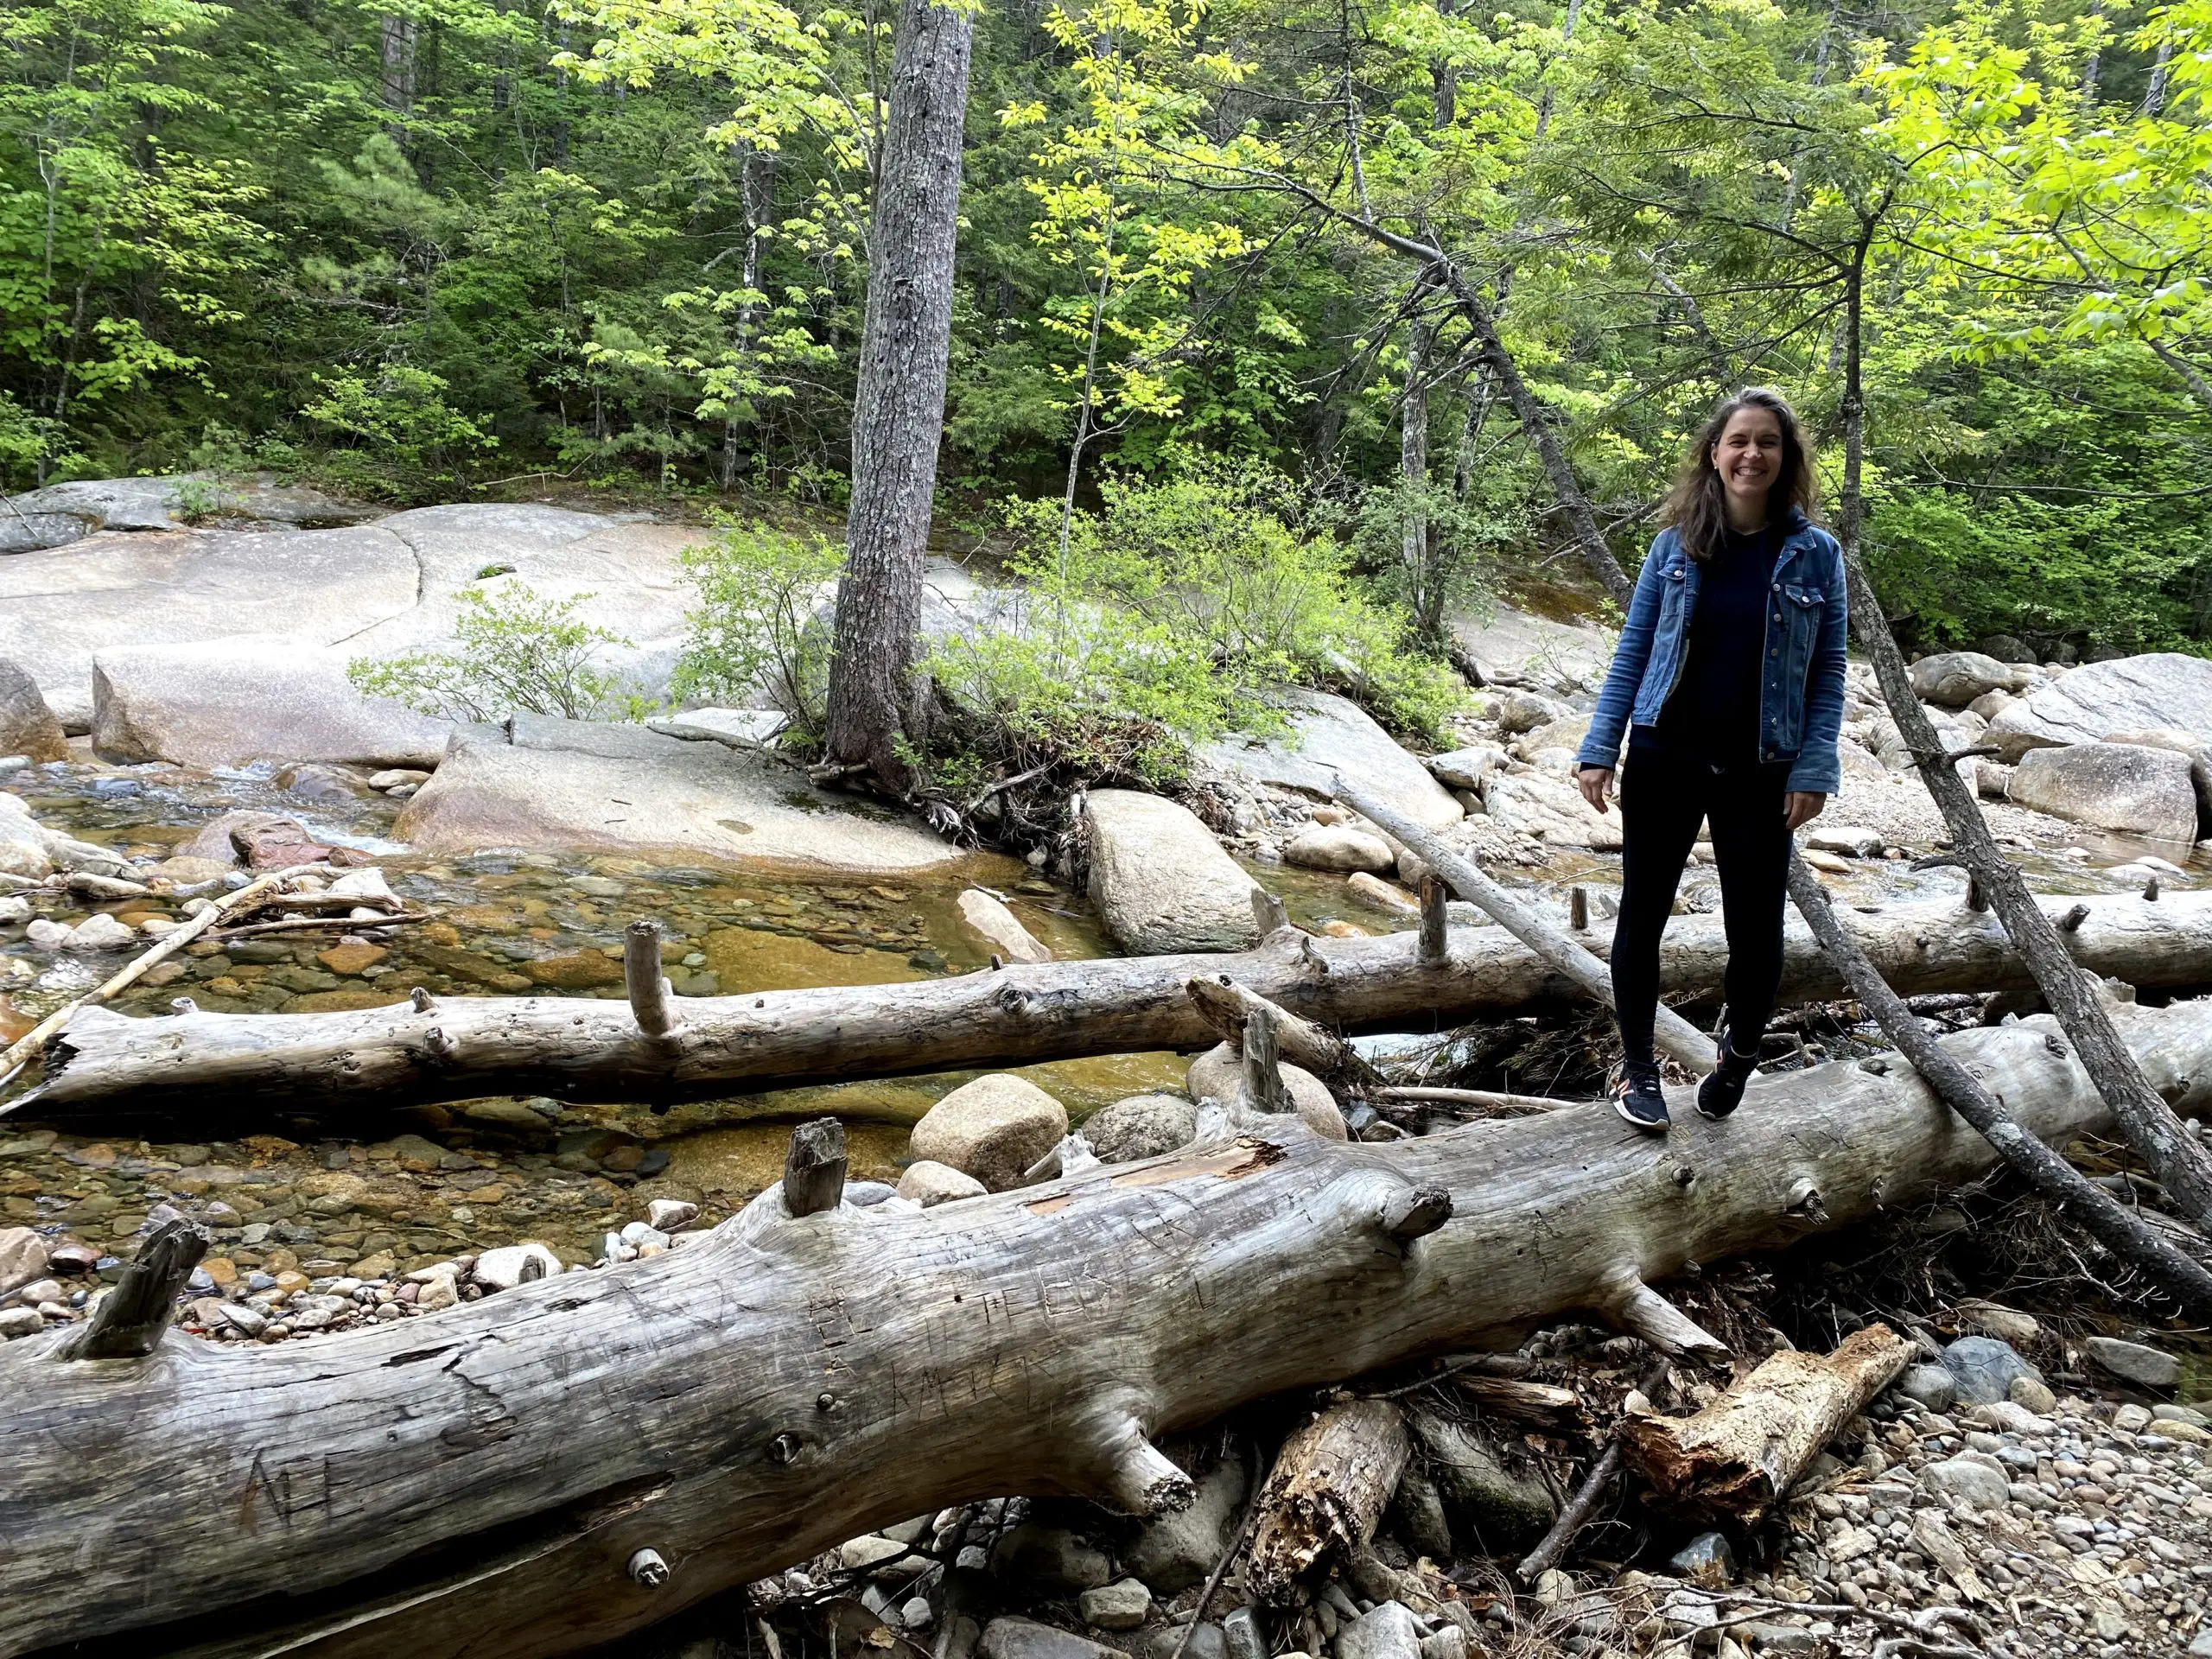 Kristen standing on a log in the woods.